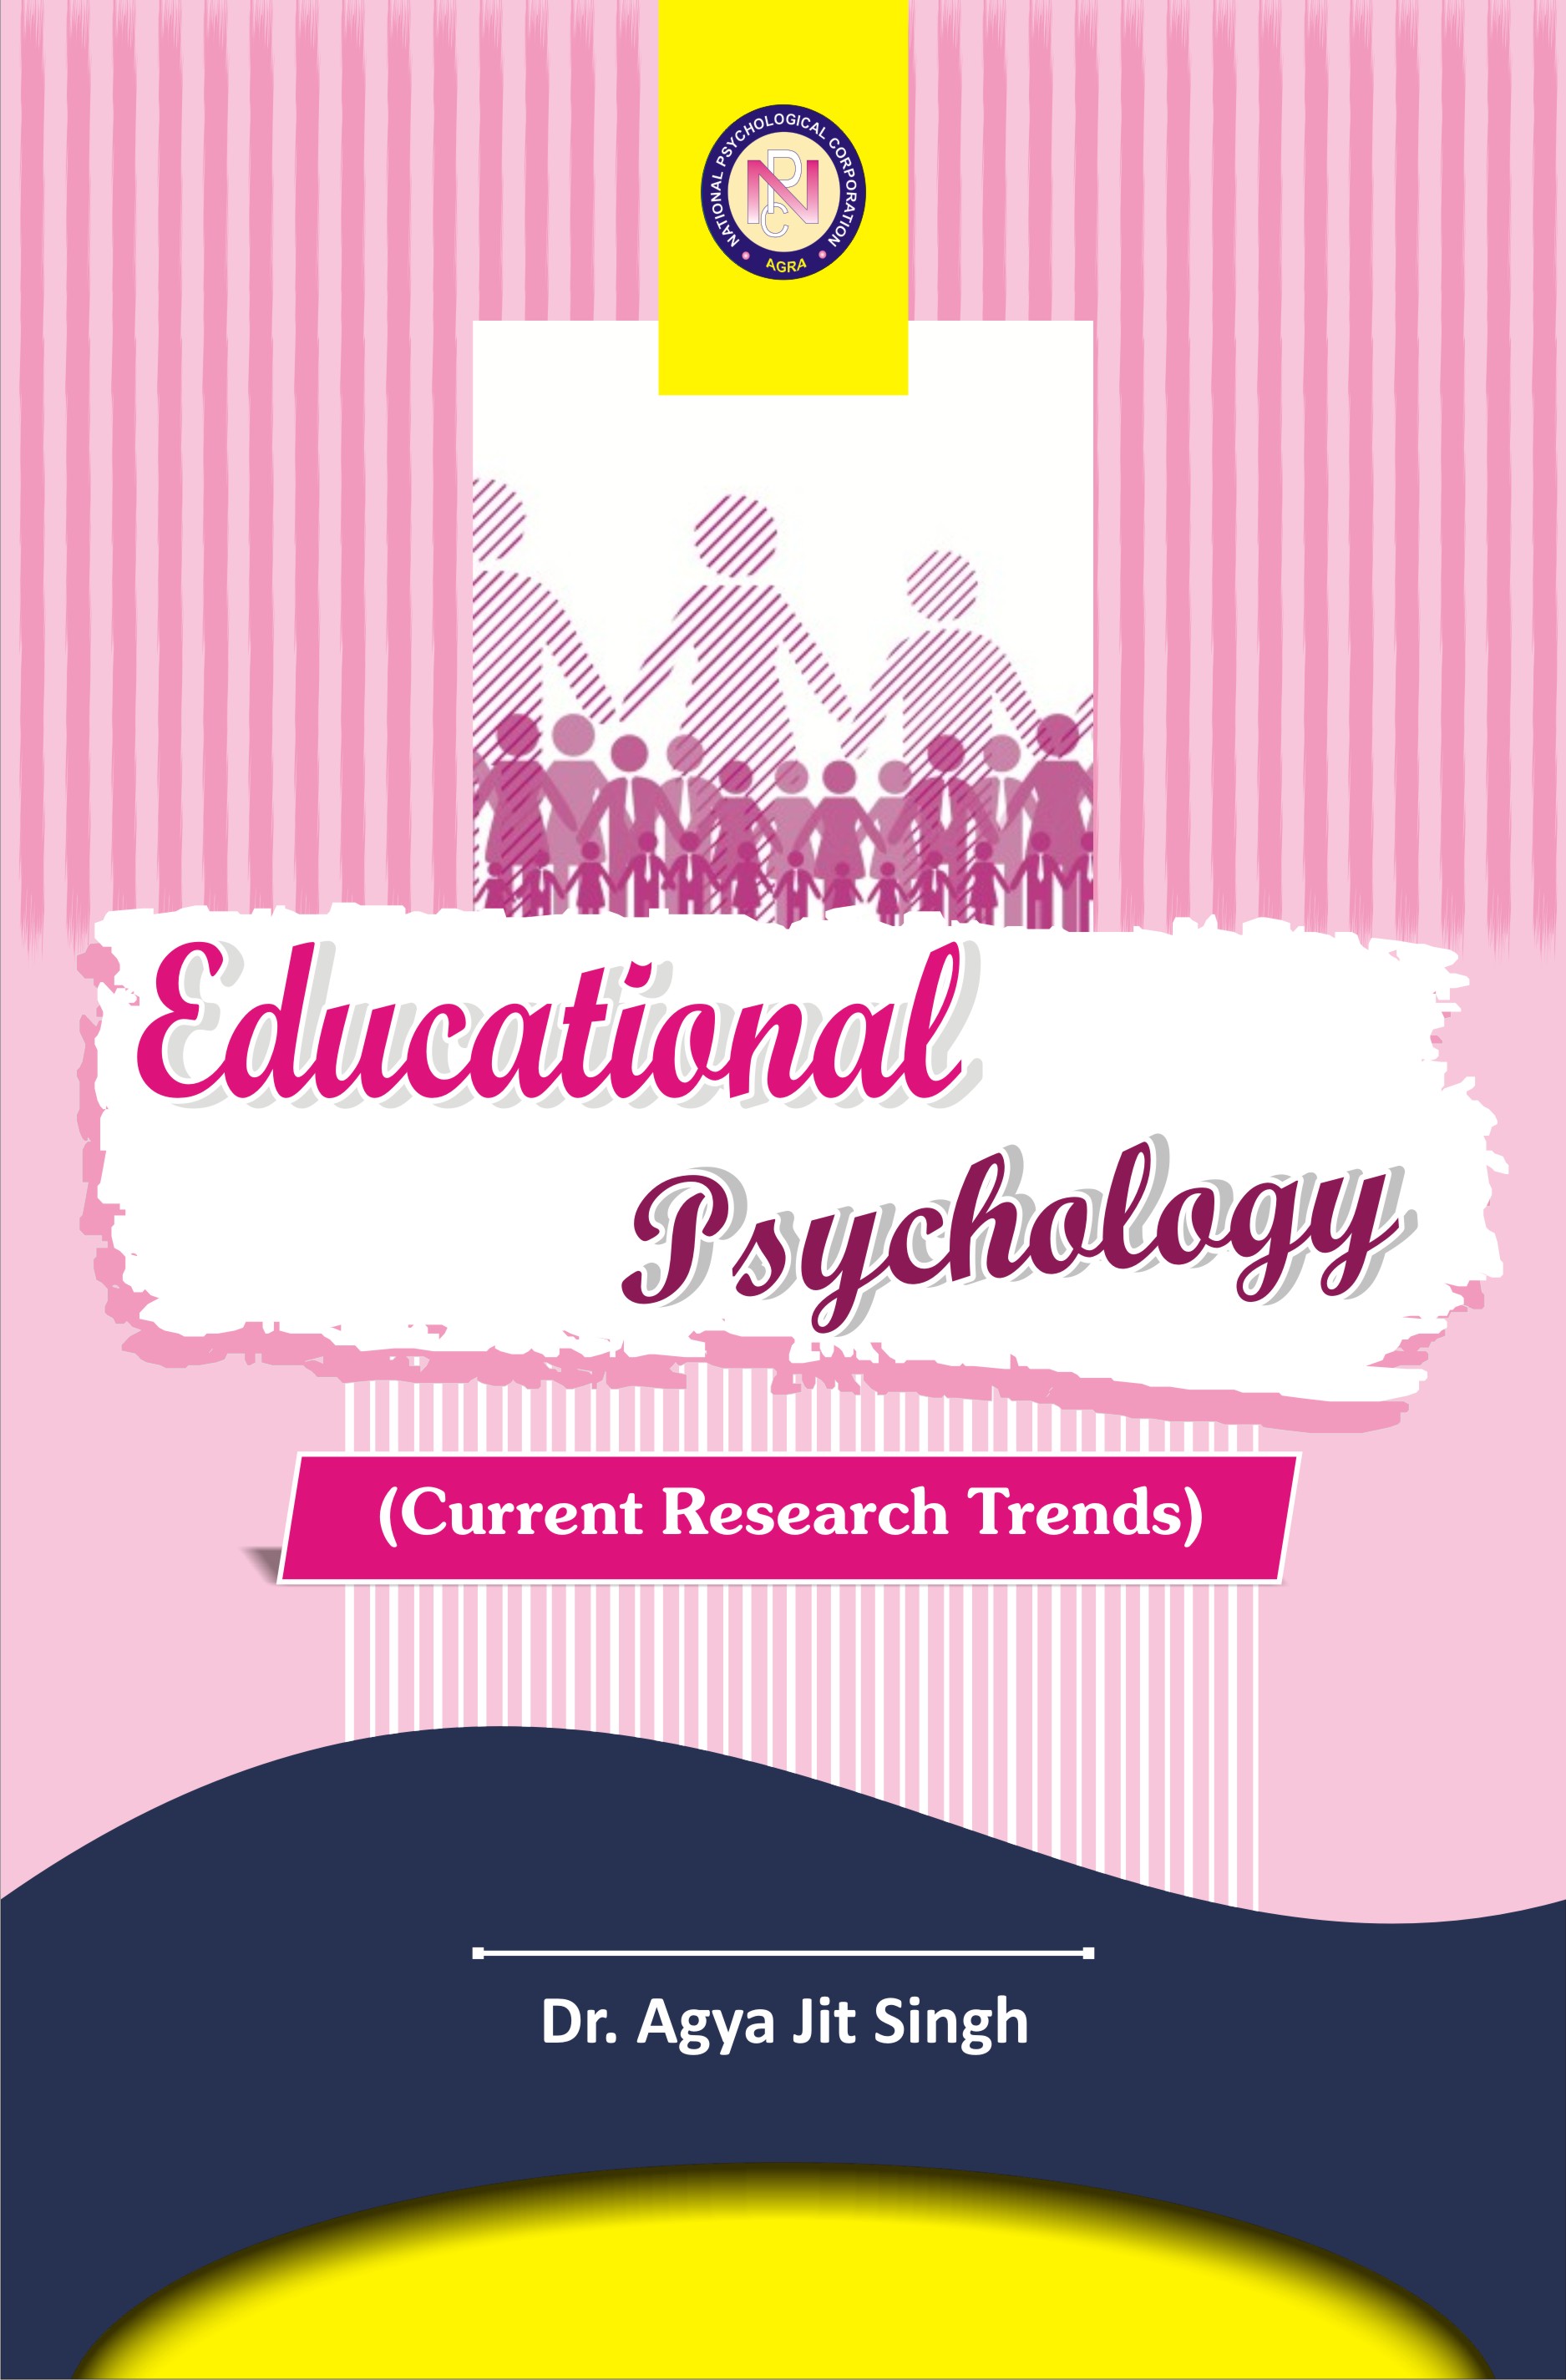 EDUCATIONAL-PSYCHOLOGY-(Current-Research-Trends)